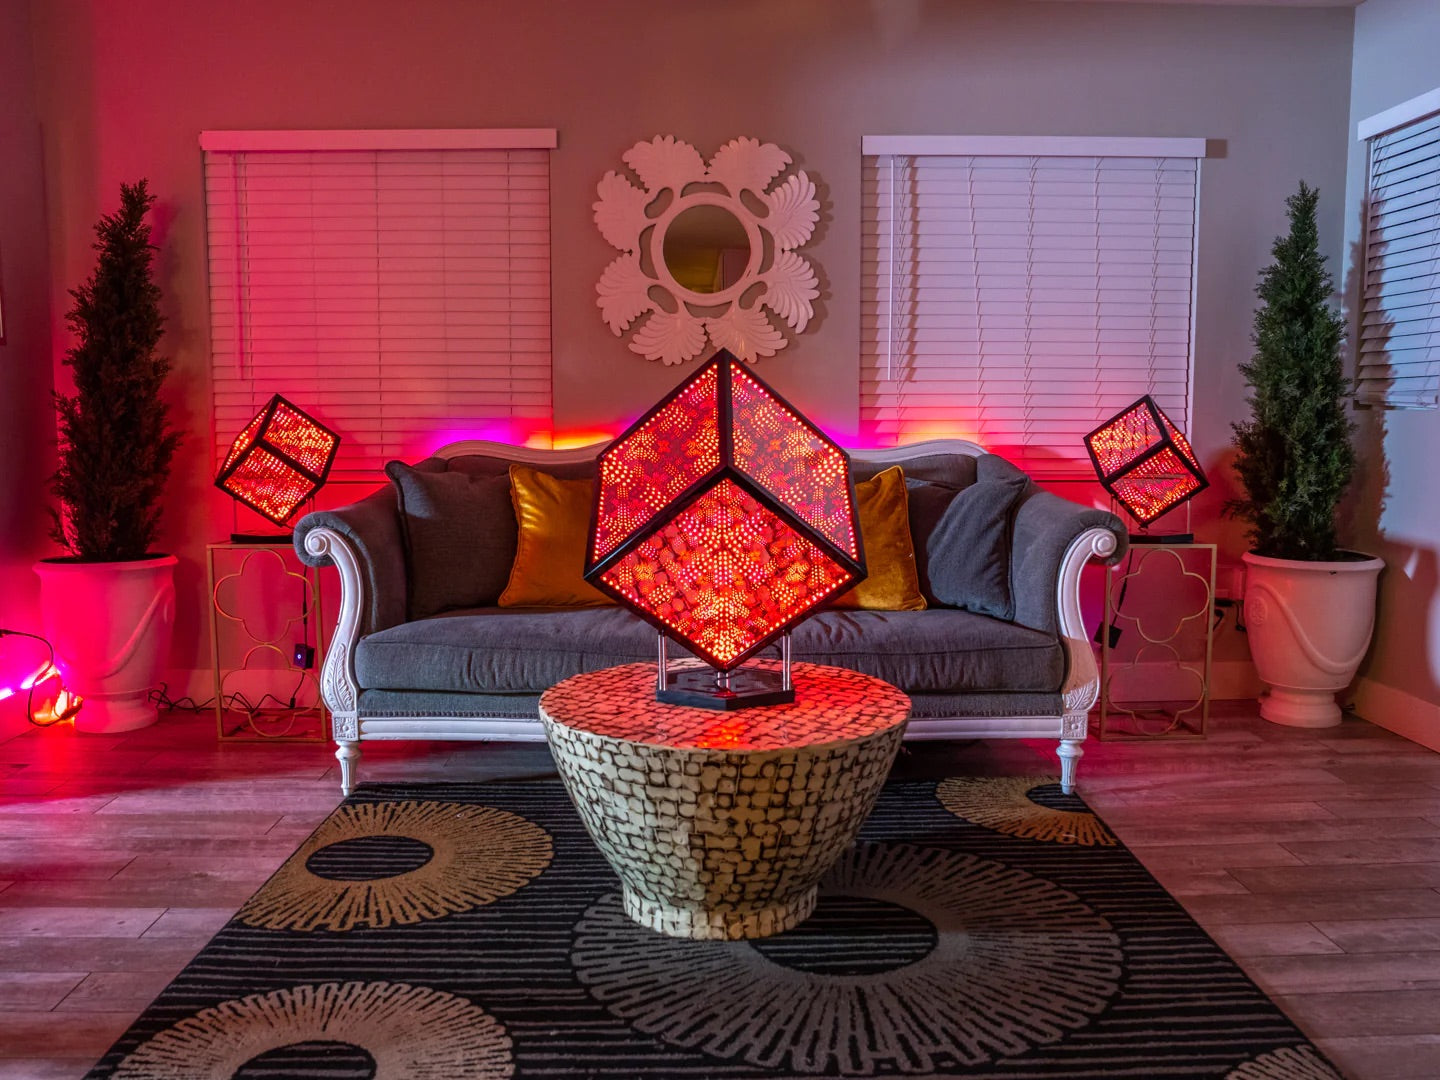 Living room with couch and a coffee table in front of it and on top of sunflower rug, complemented by HyperCube decorative lighting for living room